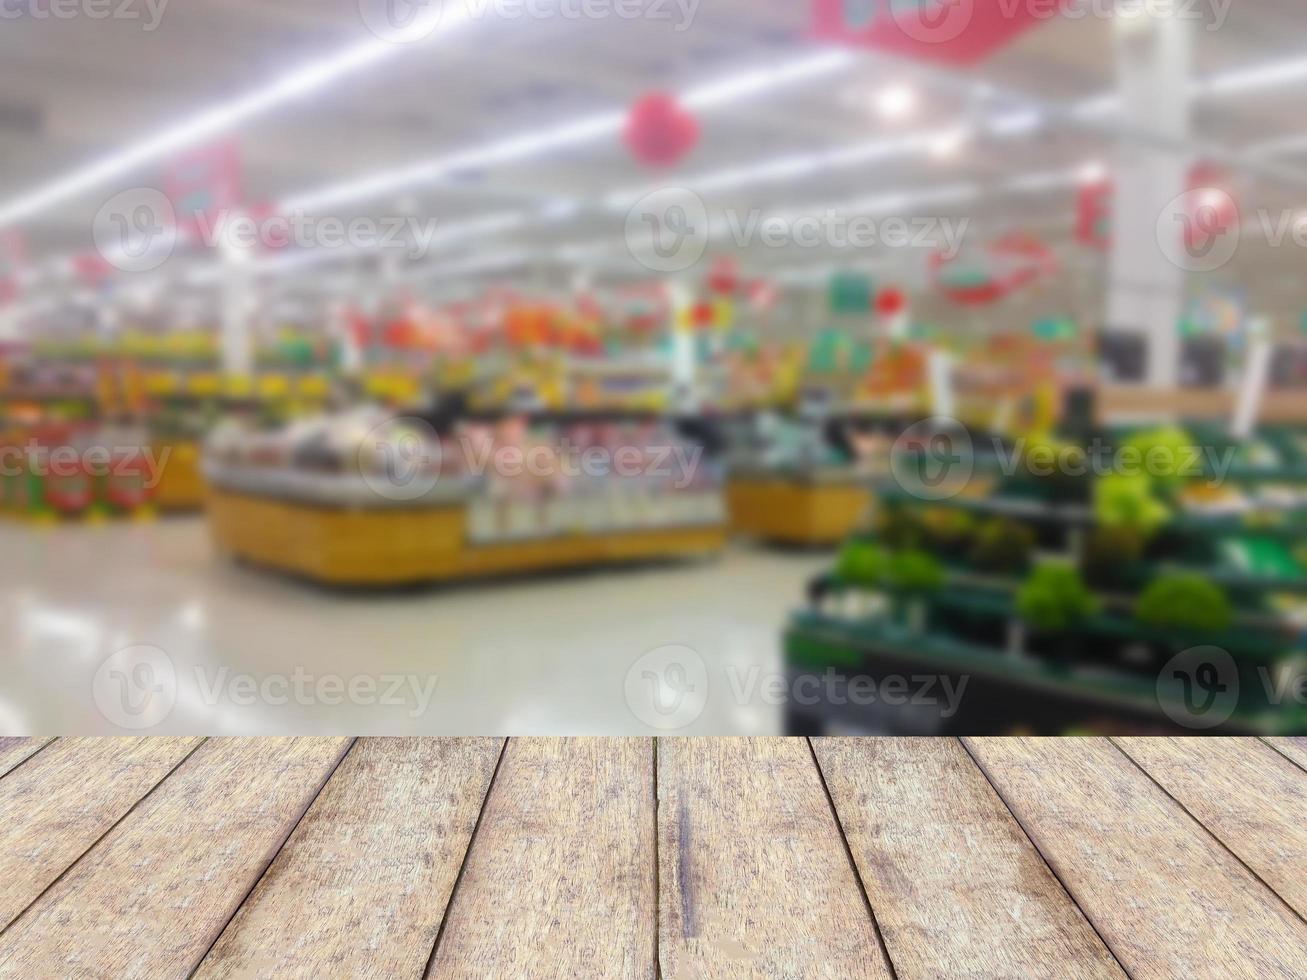 wood counter product display with fruits shelves in supermarket blurred background photo